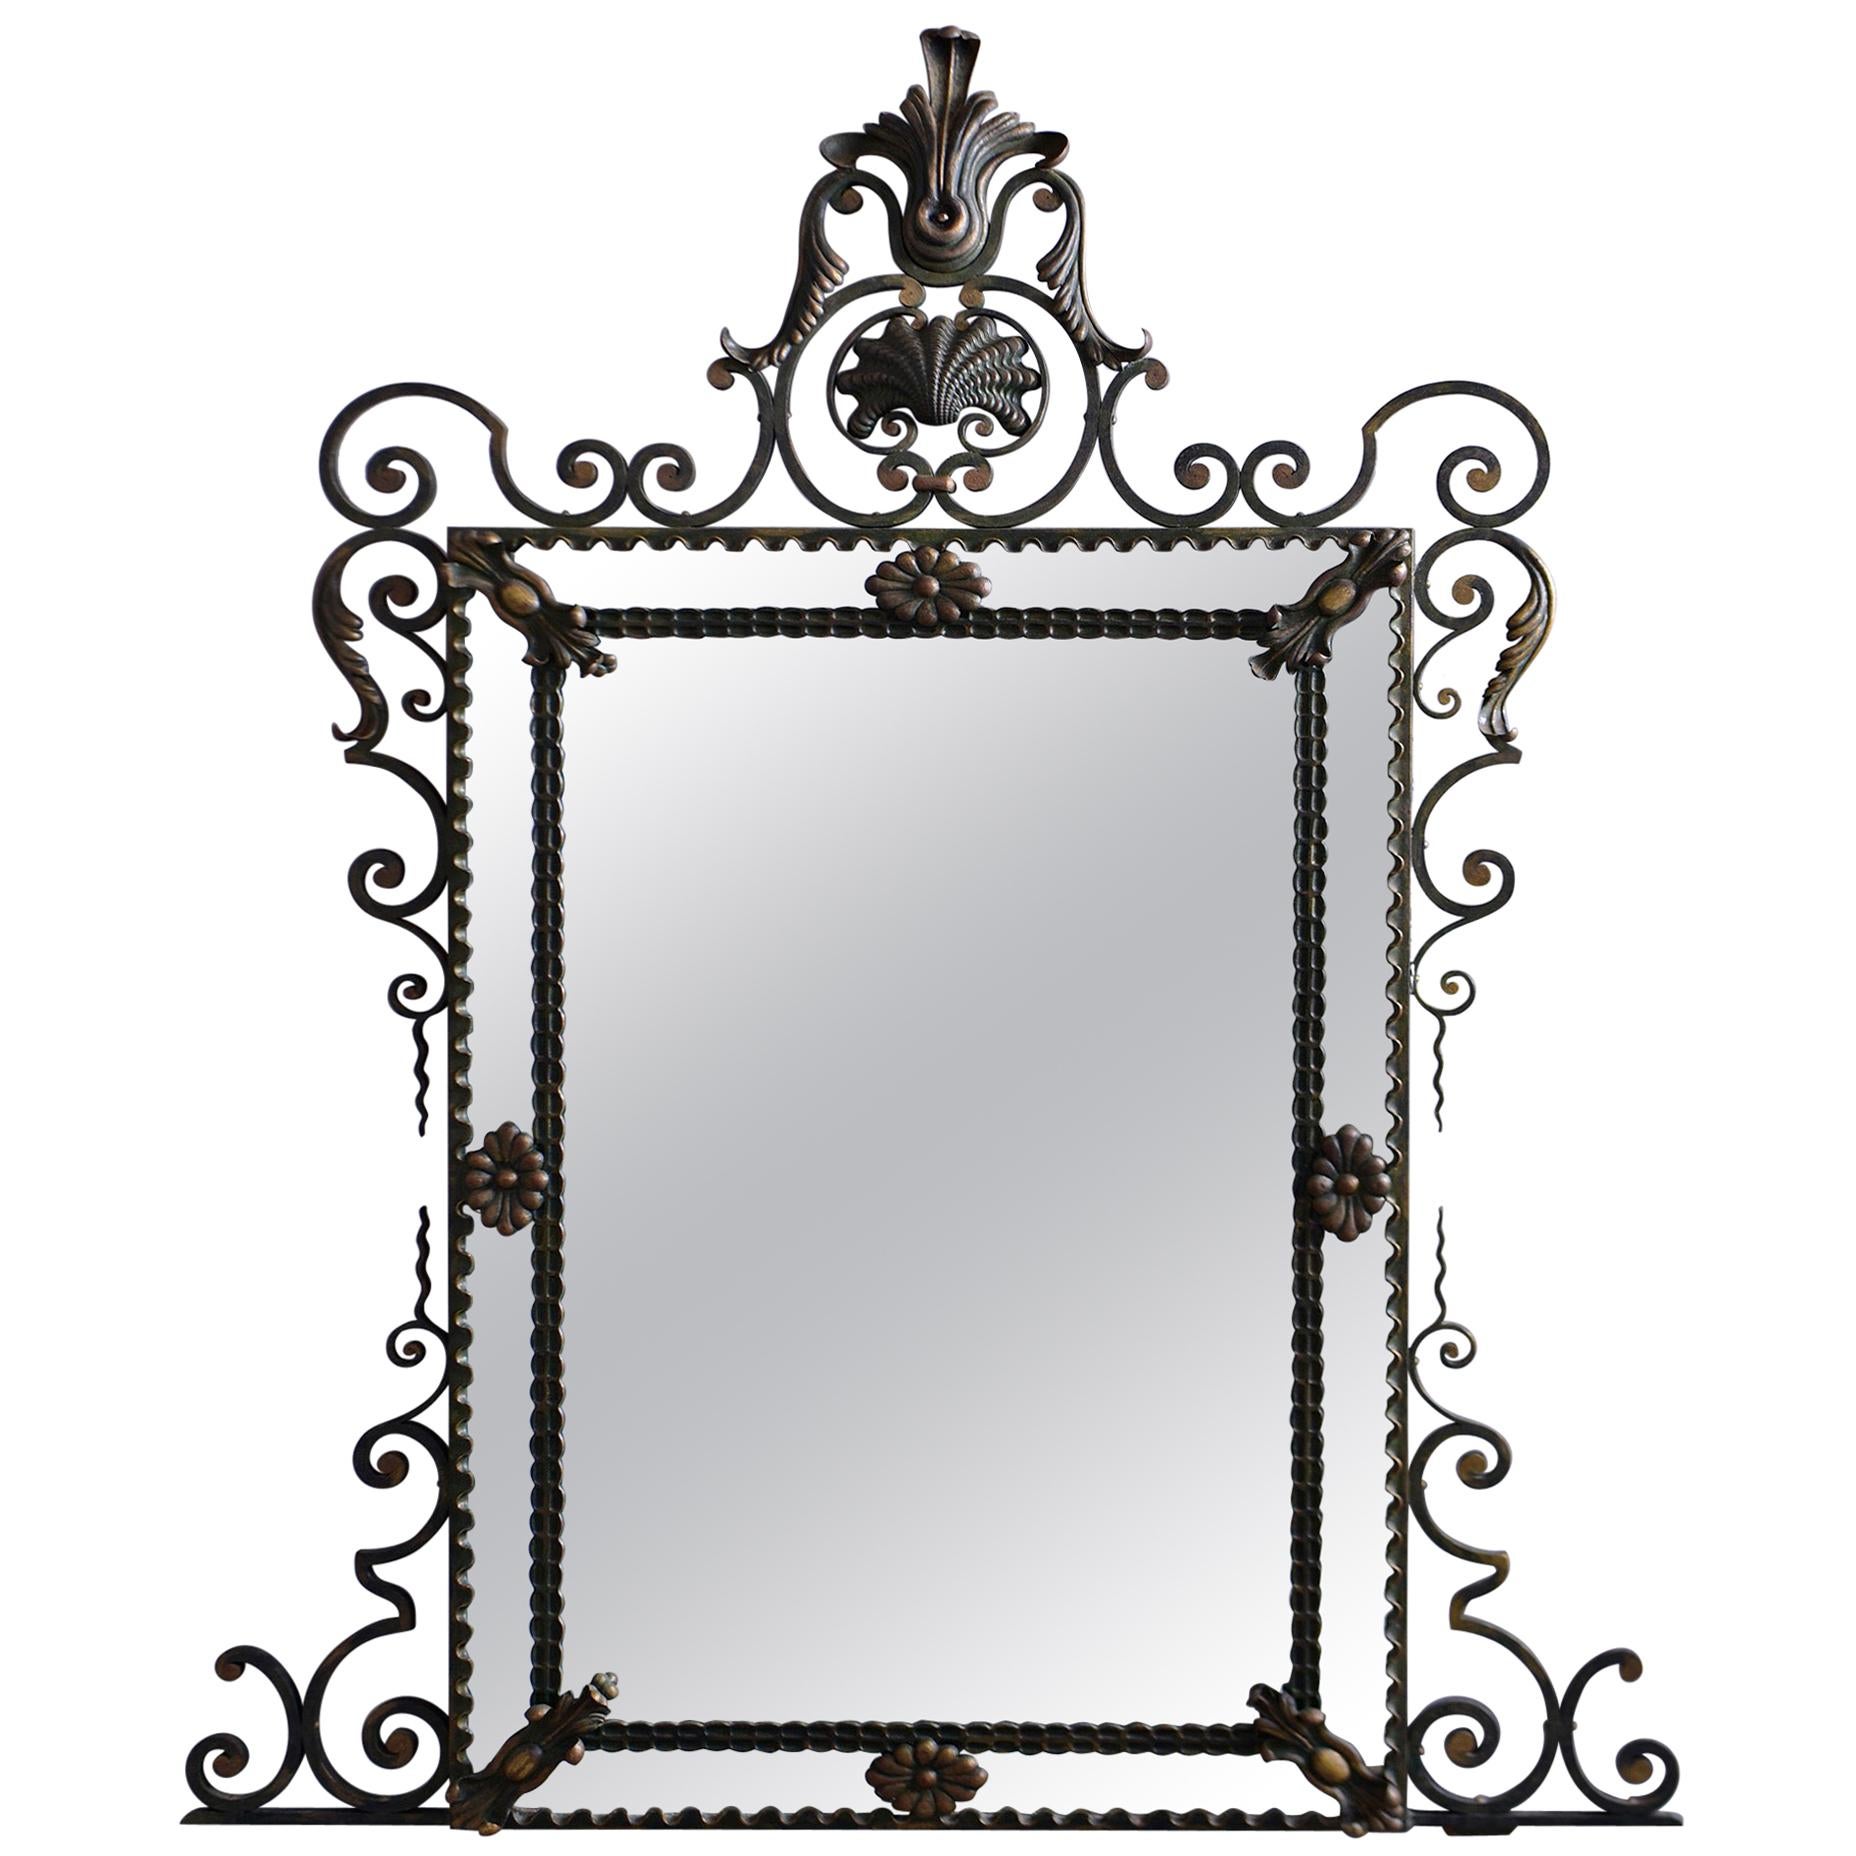 Elaborate French Iron Framed Mirror with Painted and Gilded Finish